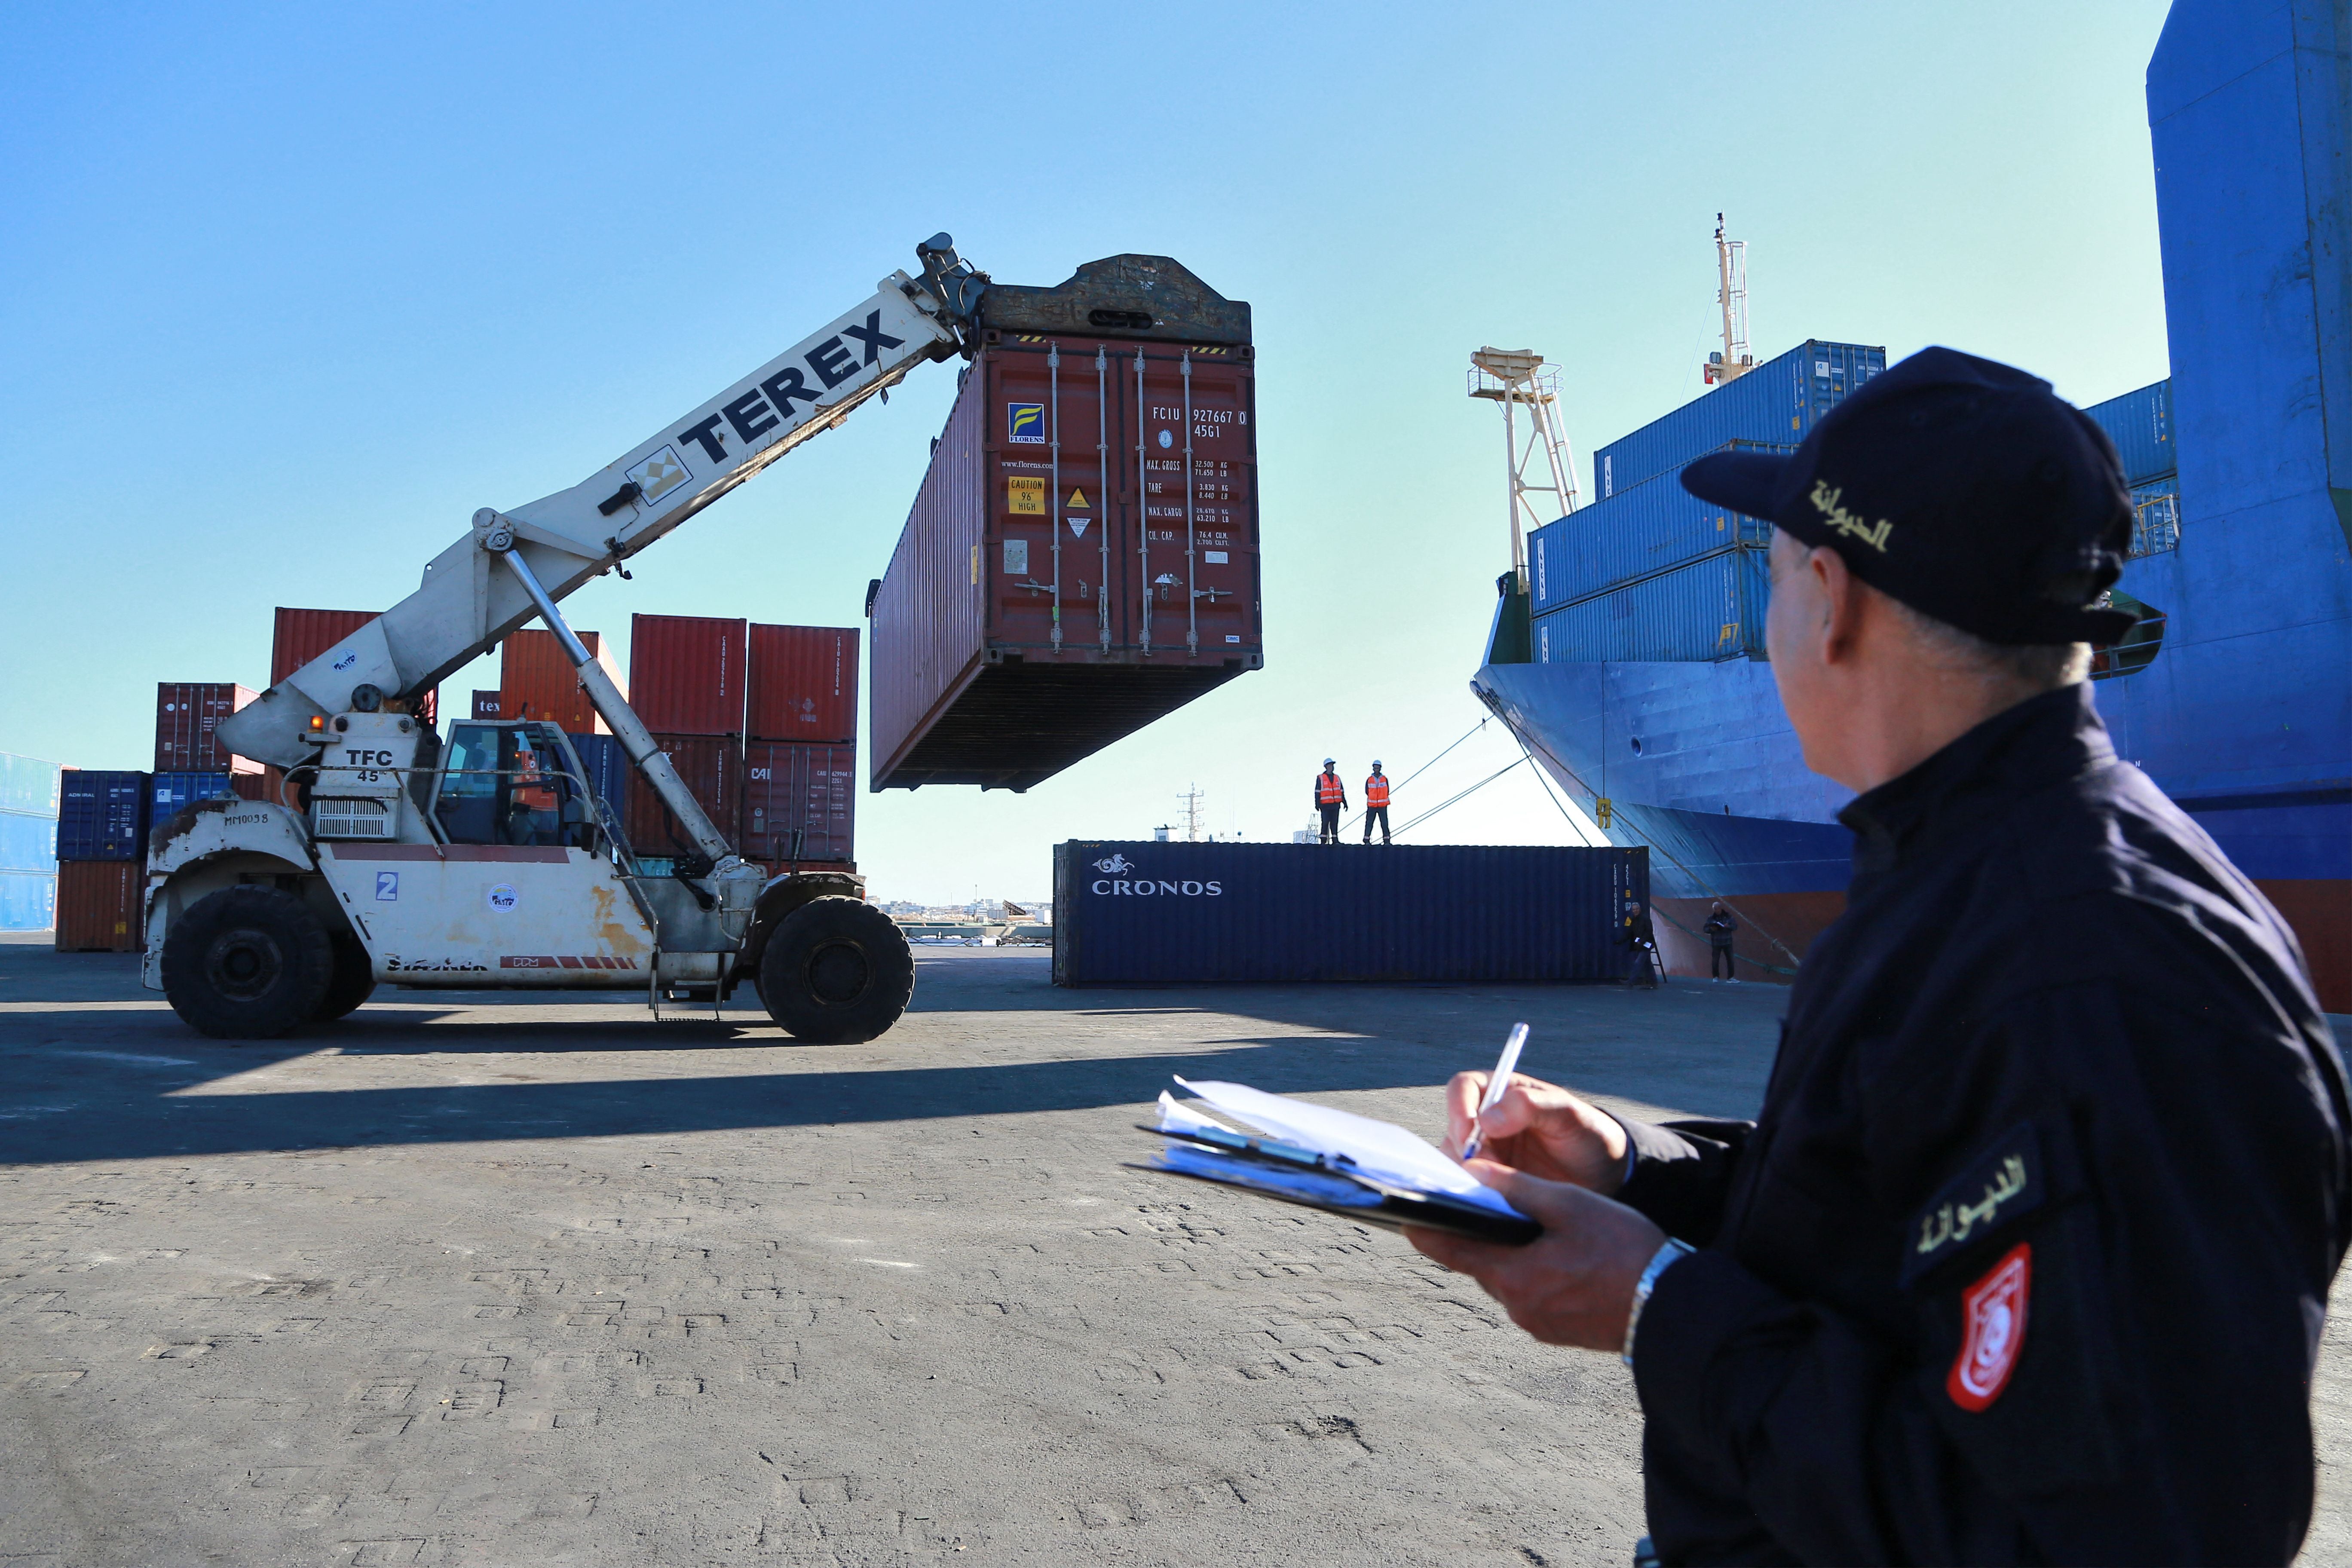 A Tunisian customs officer looks on as containers filled with Italian waste illegally imported into the country are carried to be loaded onto a ship to be returned to the Italian port of Salerno, in the Mediterranean port city of Sousse, Tunisia, 19 February 2022